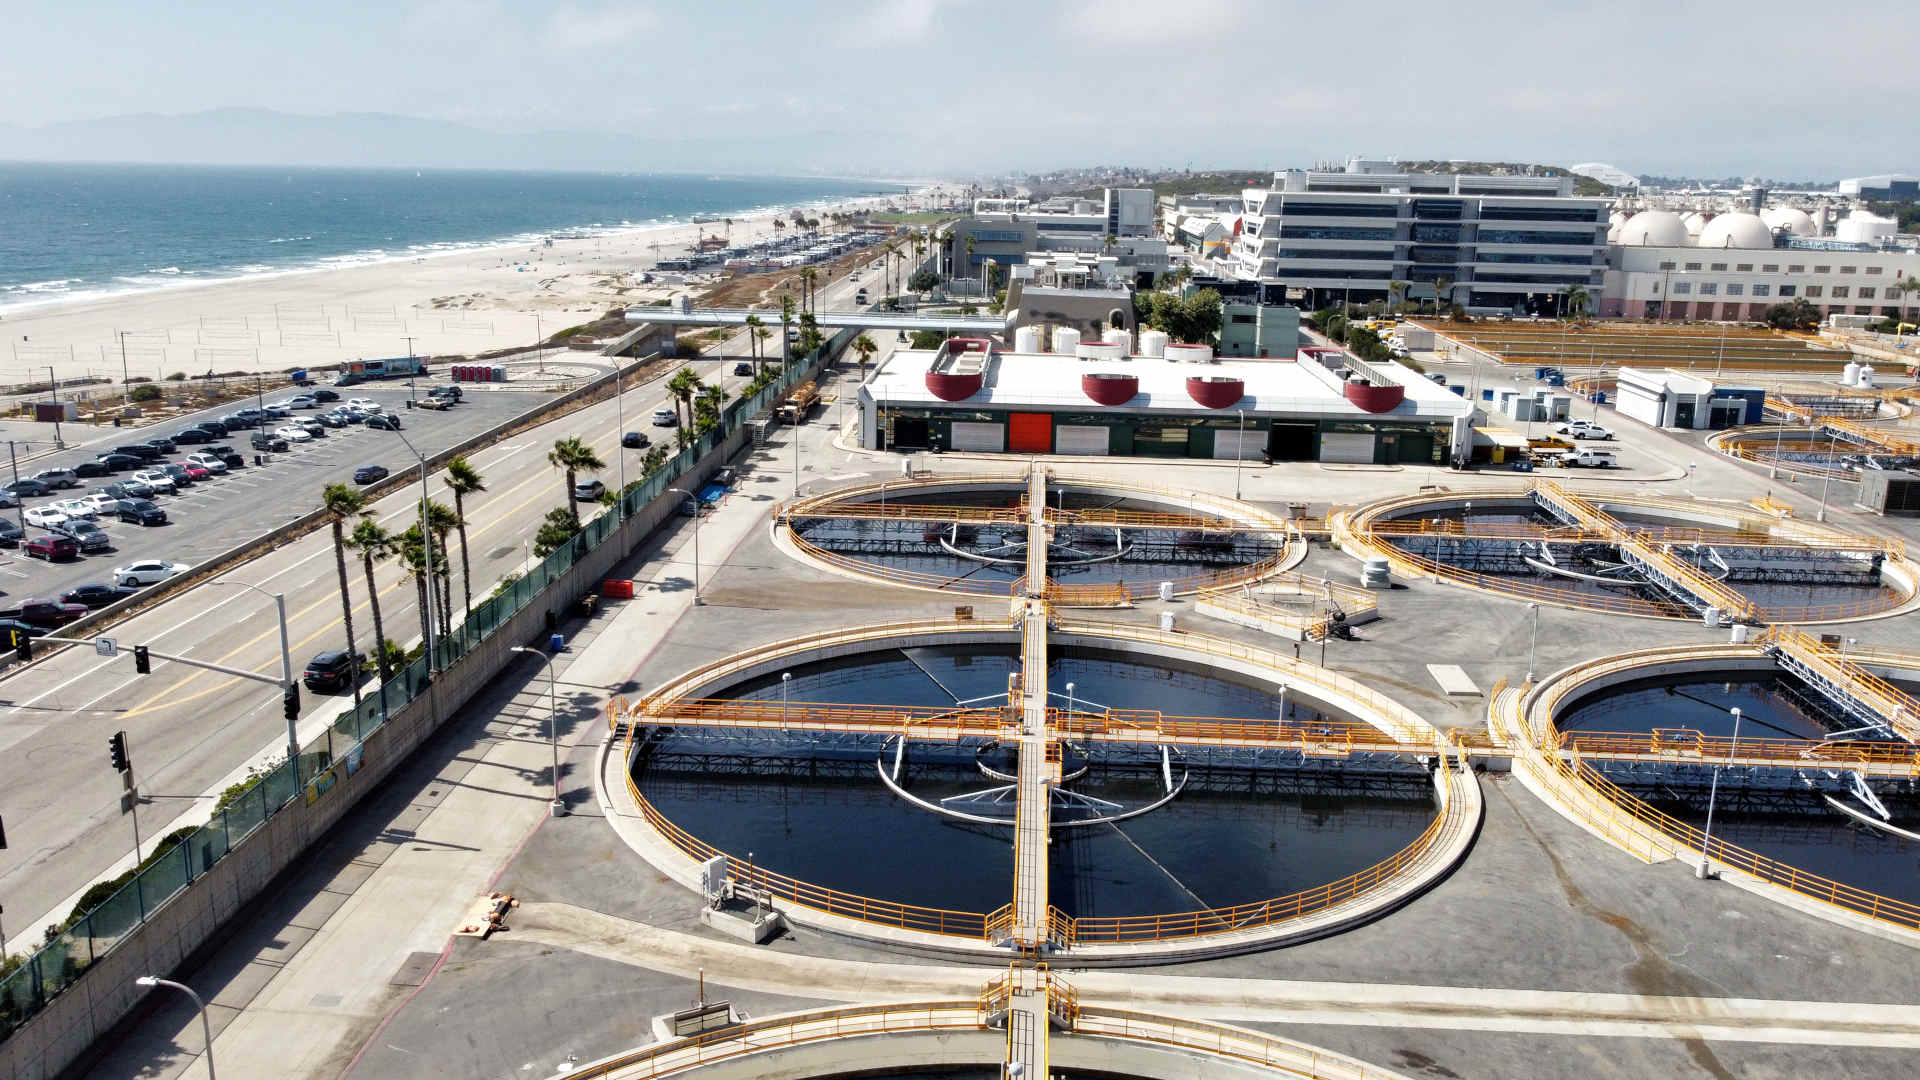 The Hyperion Water Reclamation Plant is the largest treatment facility for Los Angeles' municipal wastewater.